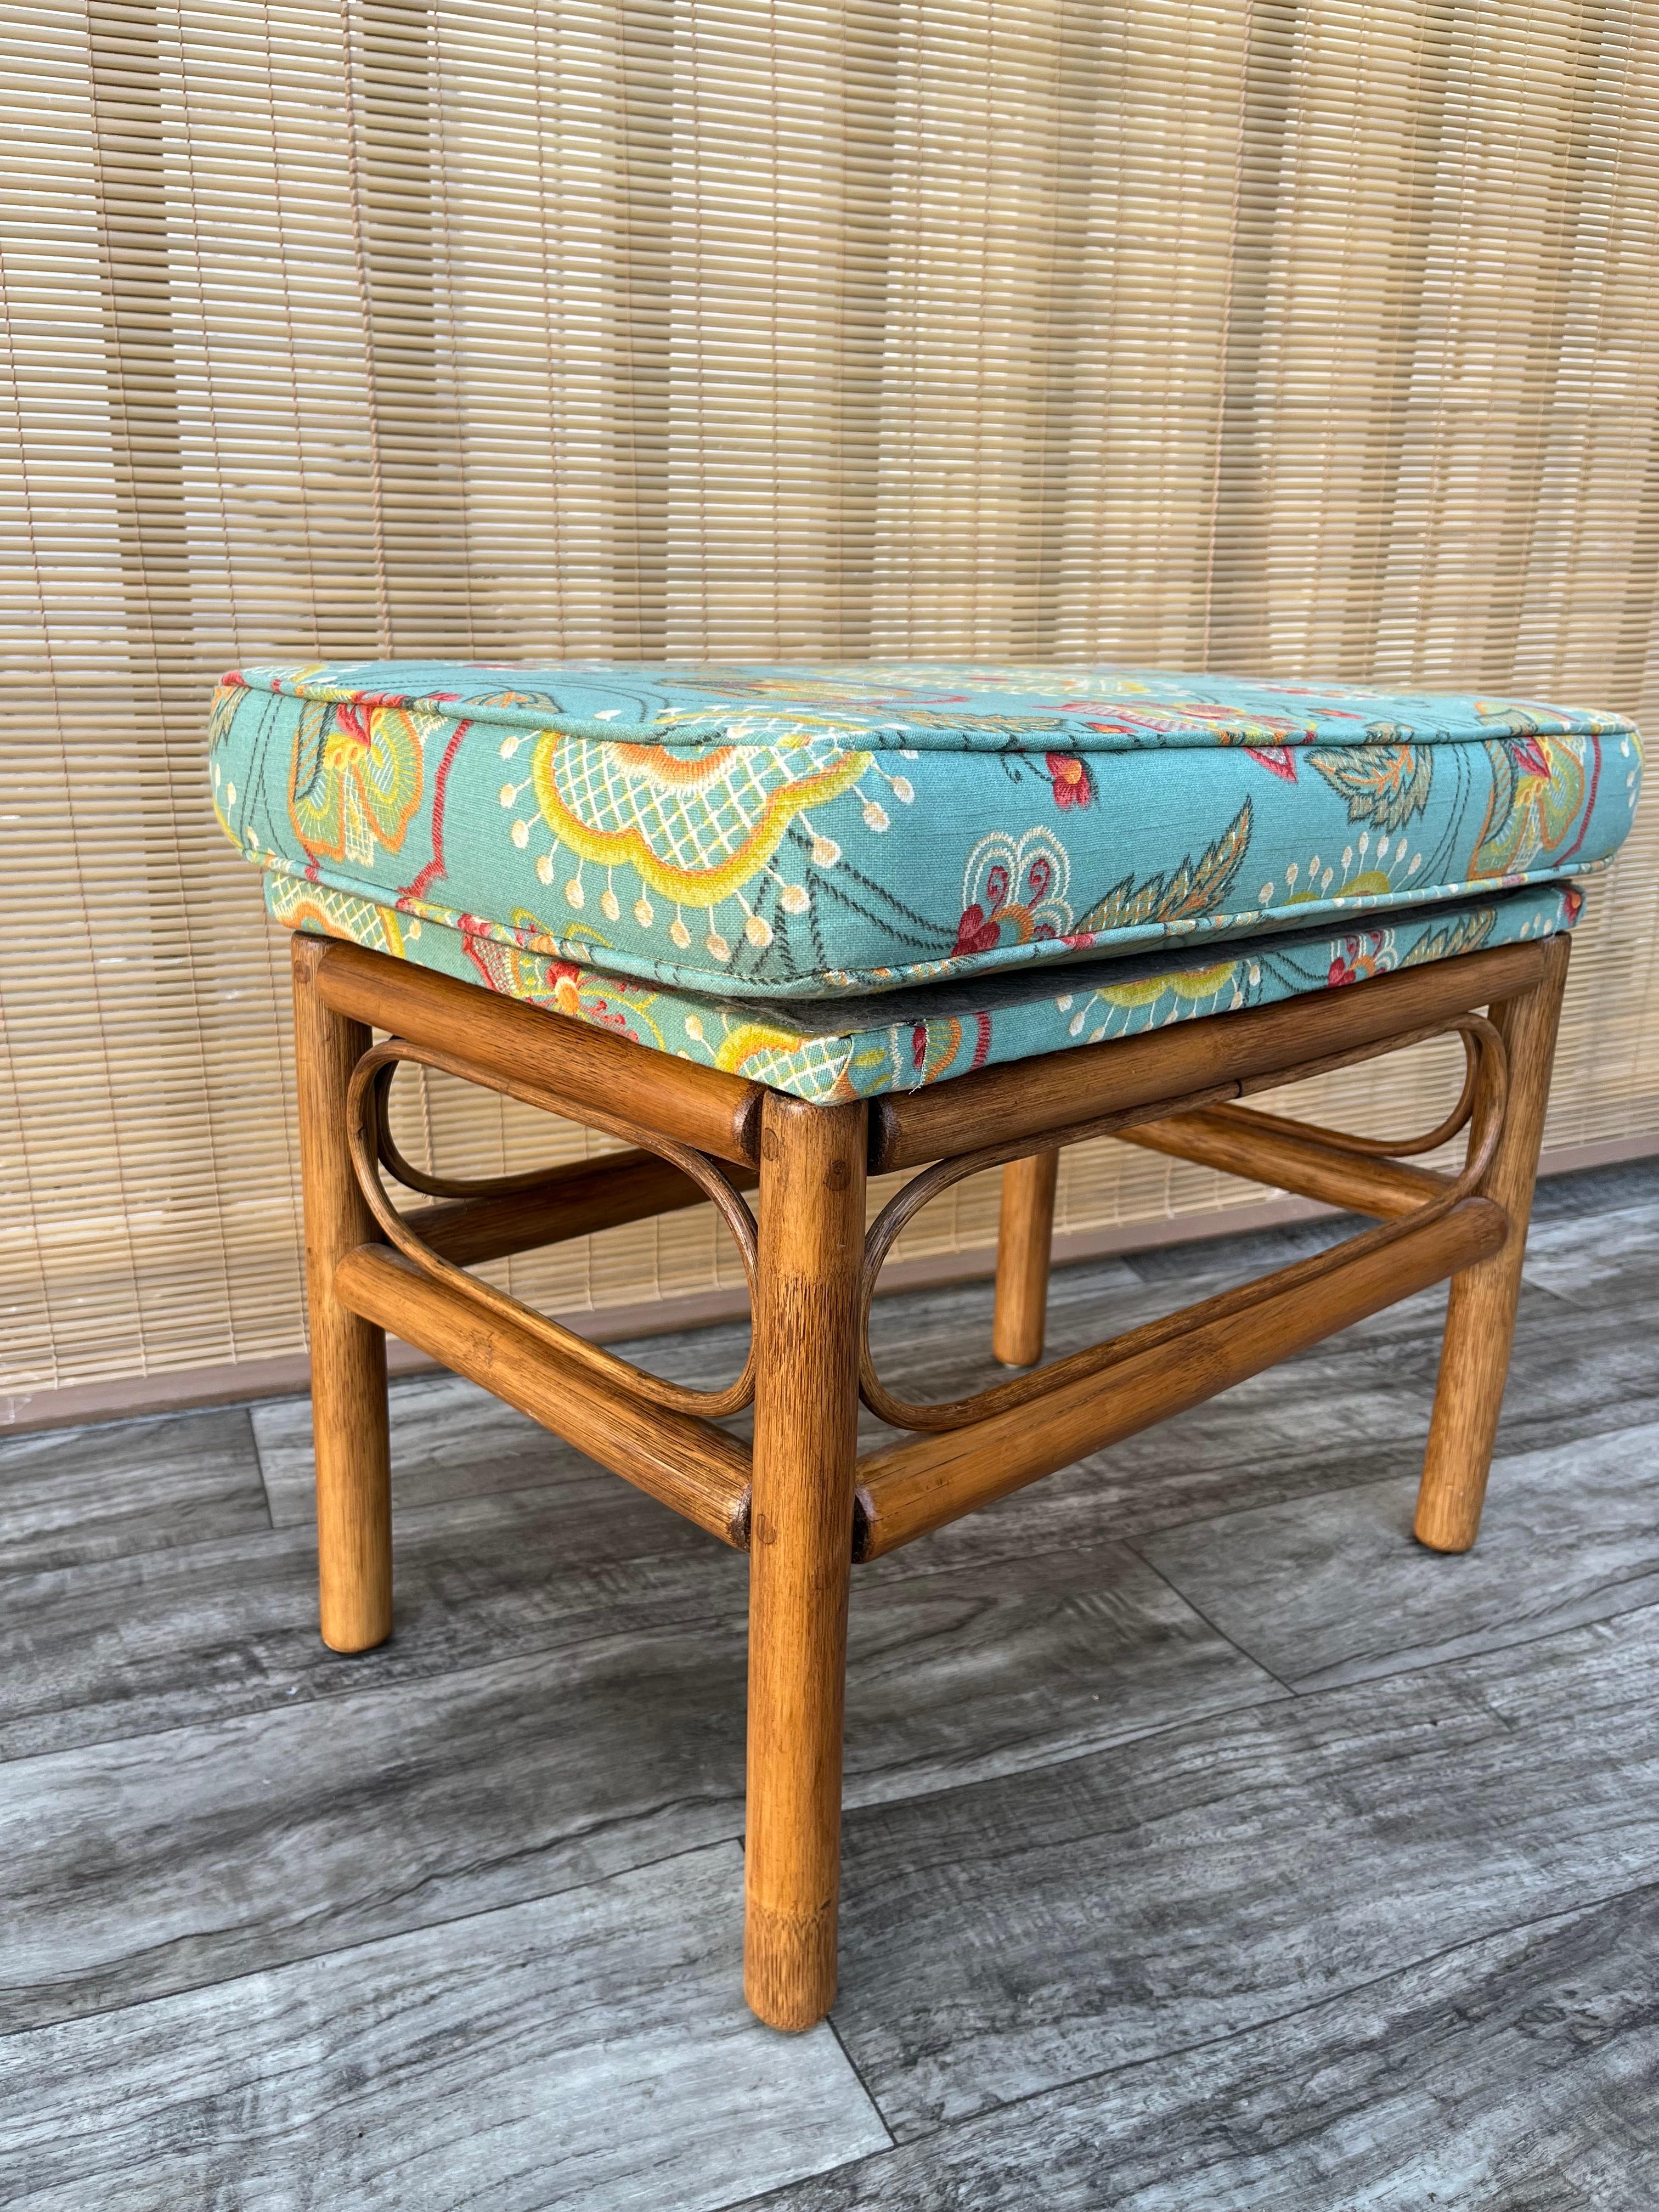 Mid-20th Century Vintage Coastal Style, Boho Chic Rattan Ottoman / Accent Bench For Sale